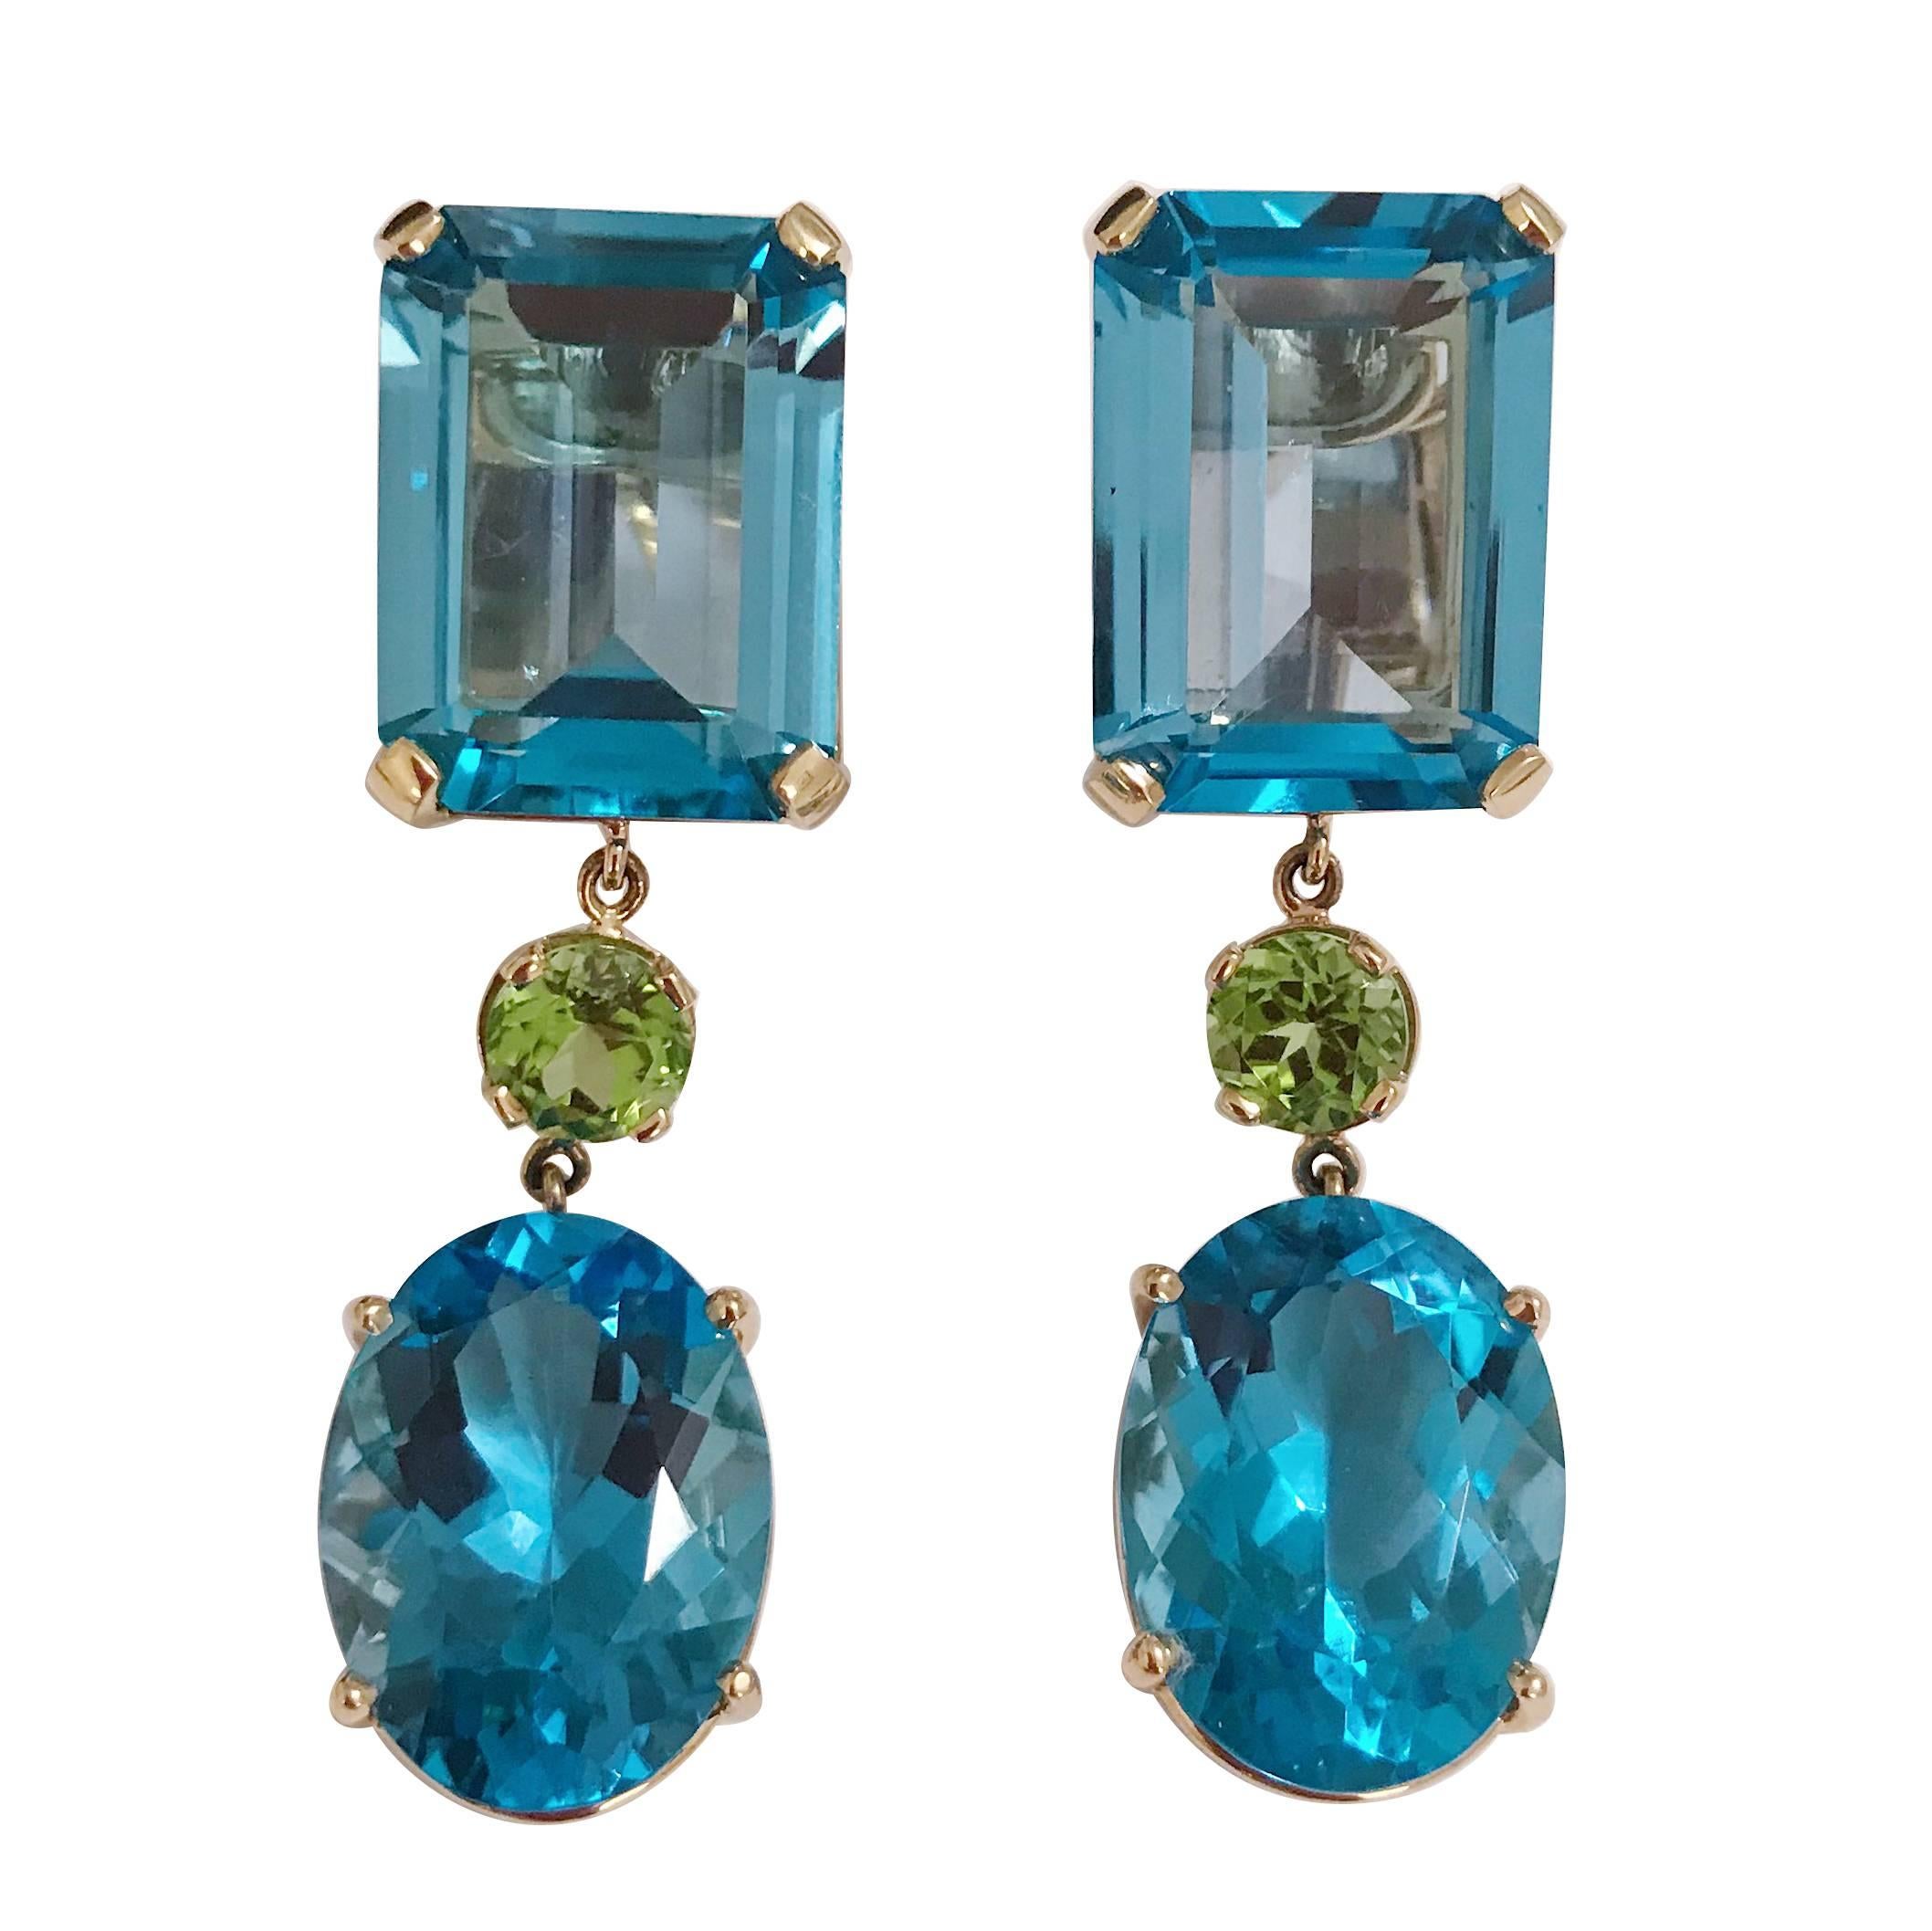 Yellow Gold Geometric Drop Earring with Blue Topaz and Peridot